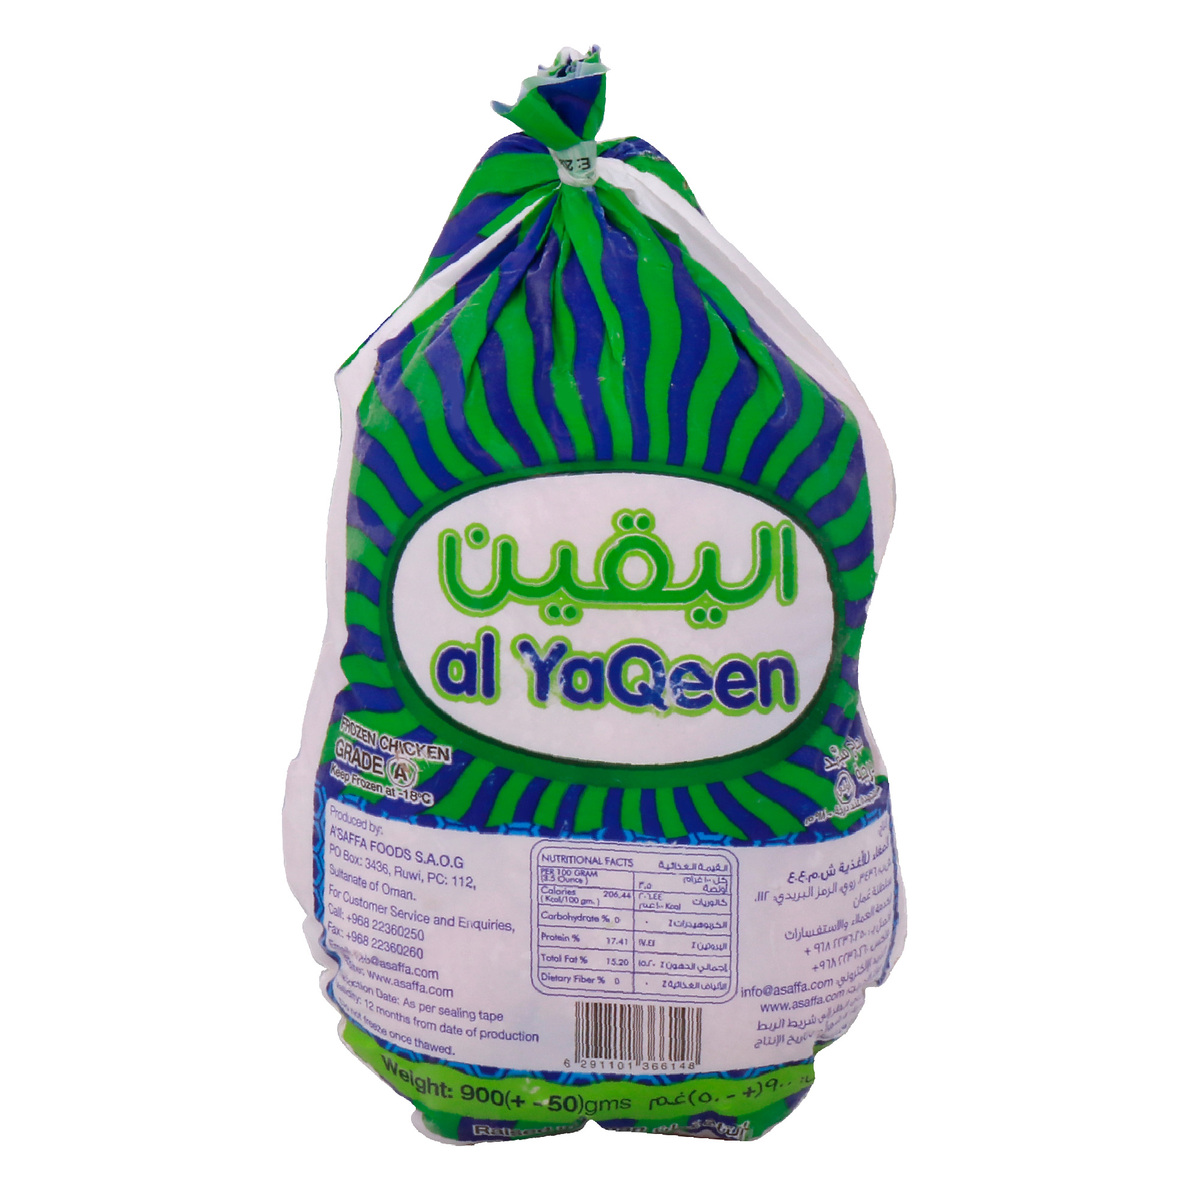 Al Yaqeen Whole Chicken 900g